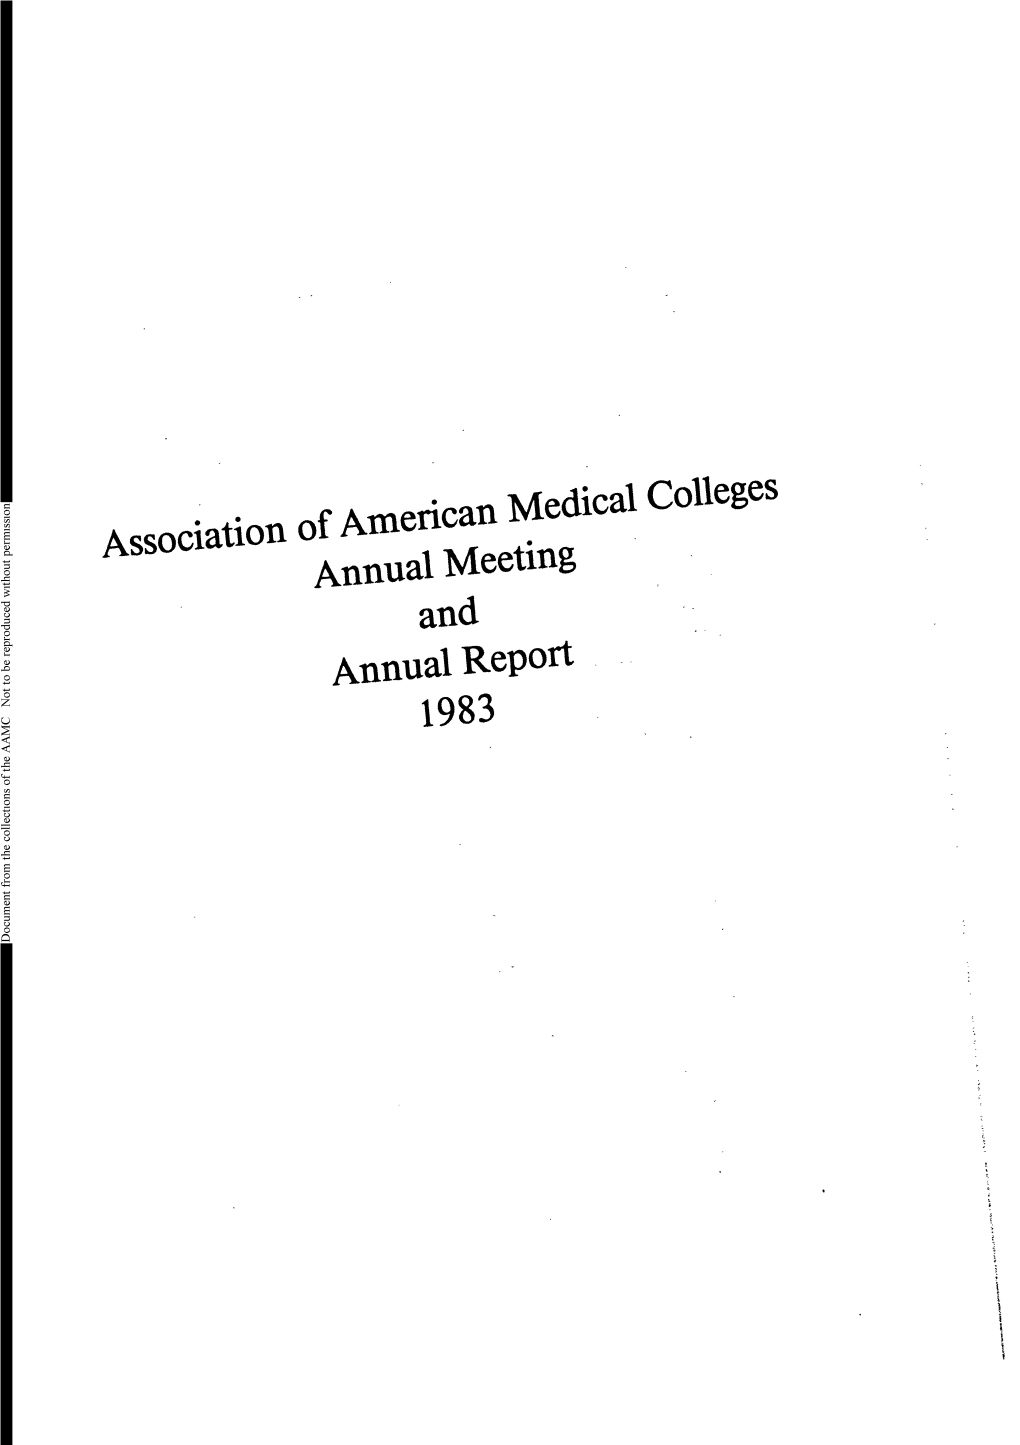 AAMC Annual Meeting and Annual Report 1983